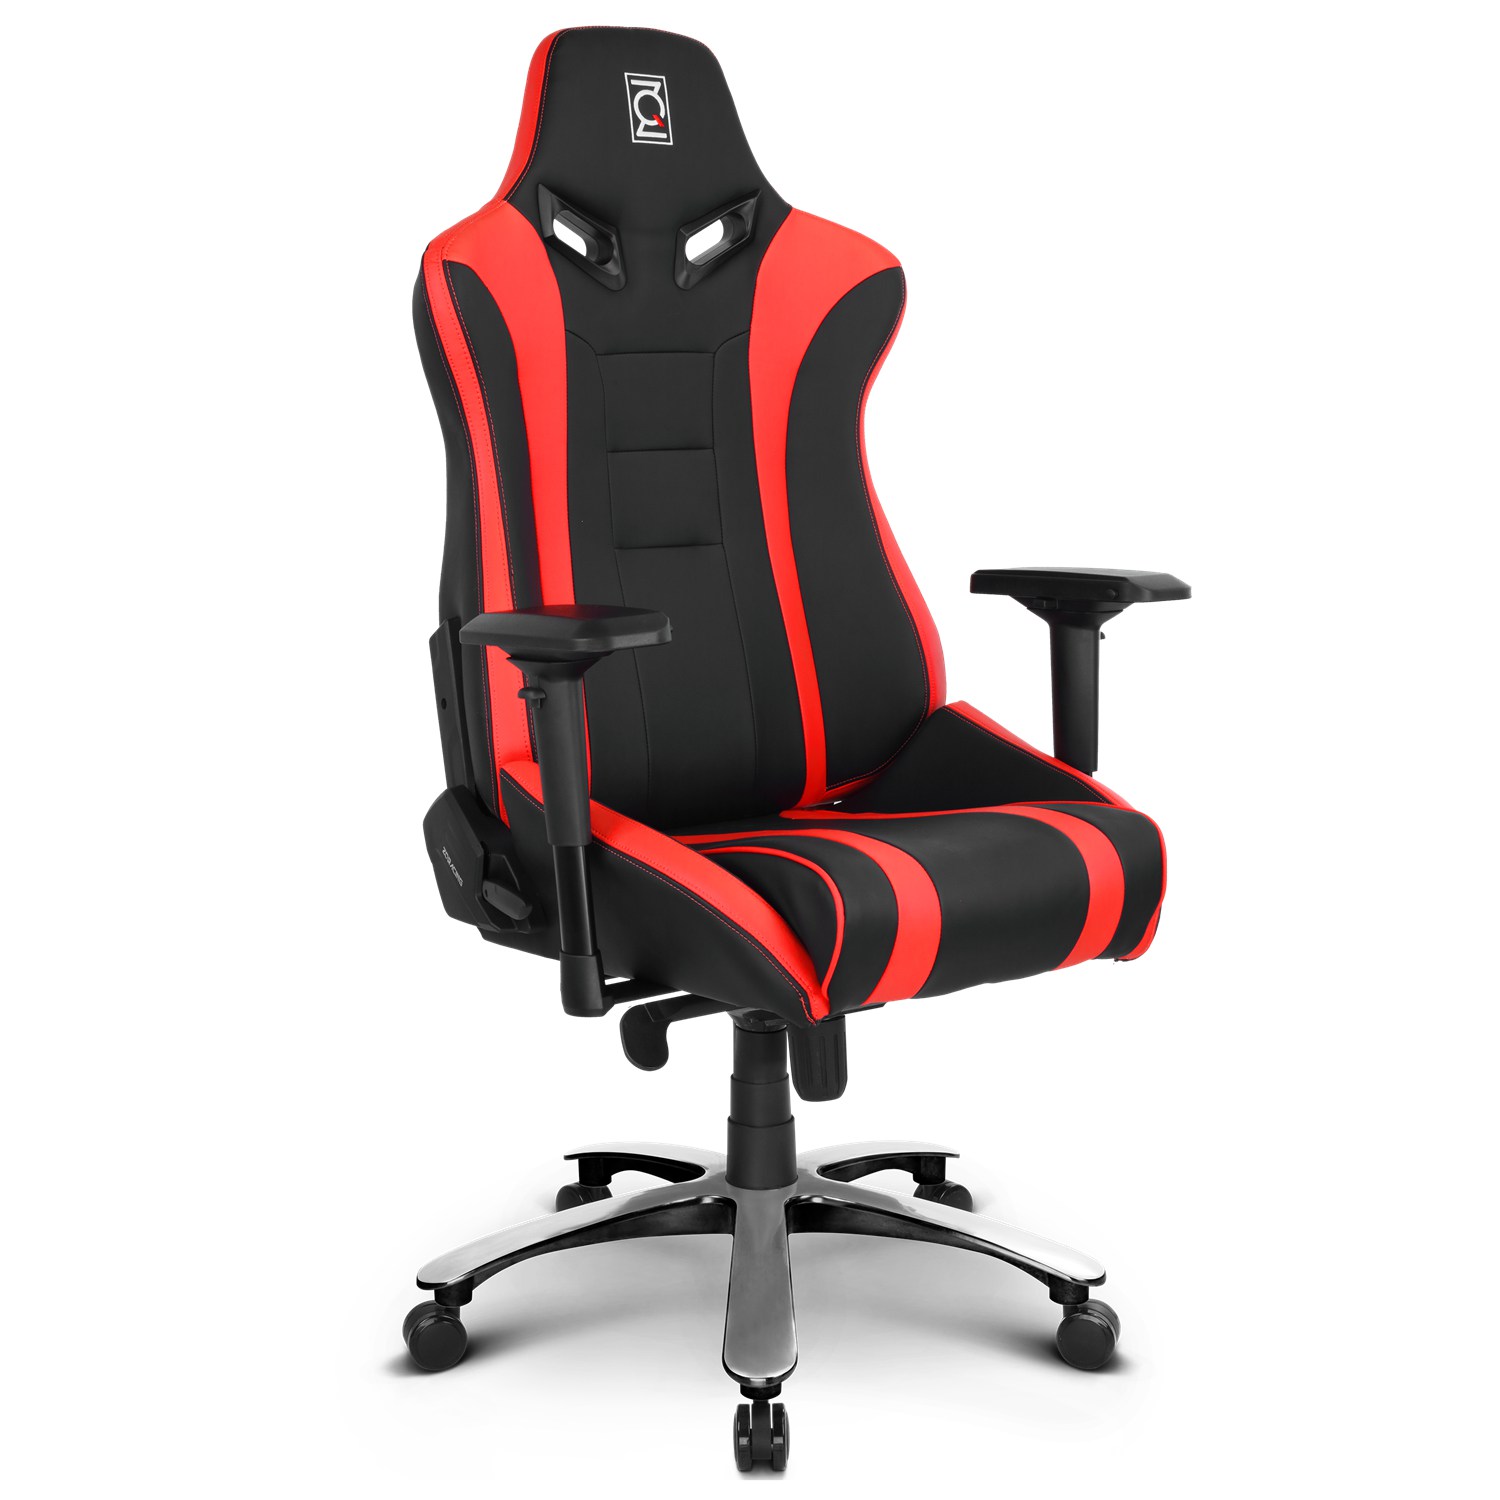 Zqracing Alien Xl Series Gaming Office Chair Red Black Zqracing